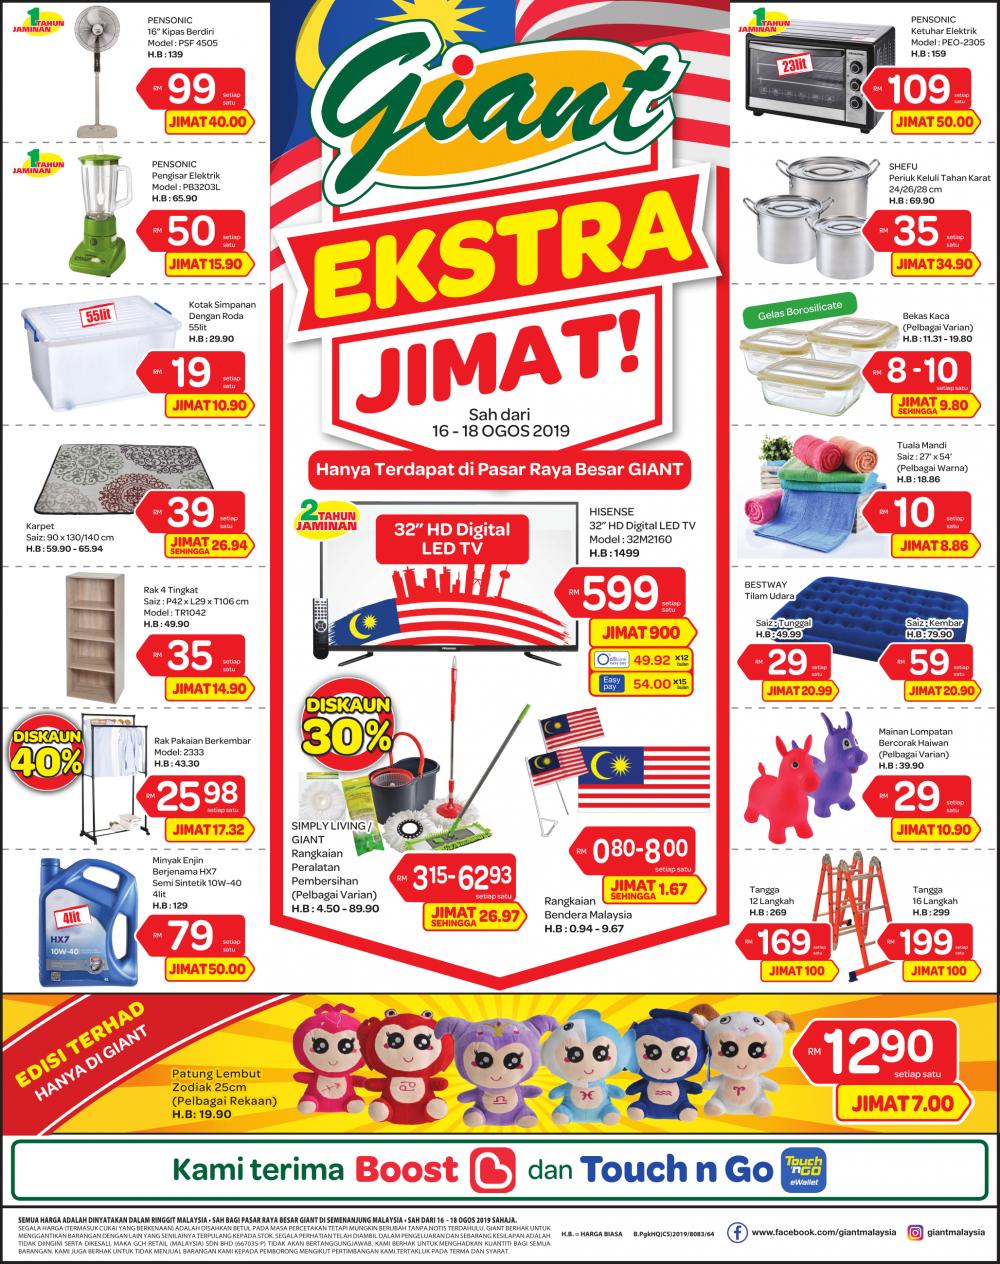 Giant Household Essentials Promotion (16 August 2019 - 18 August 2019)